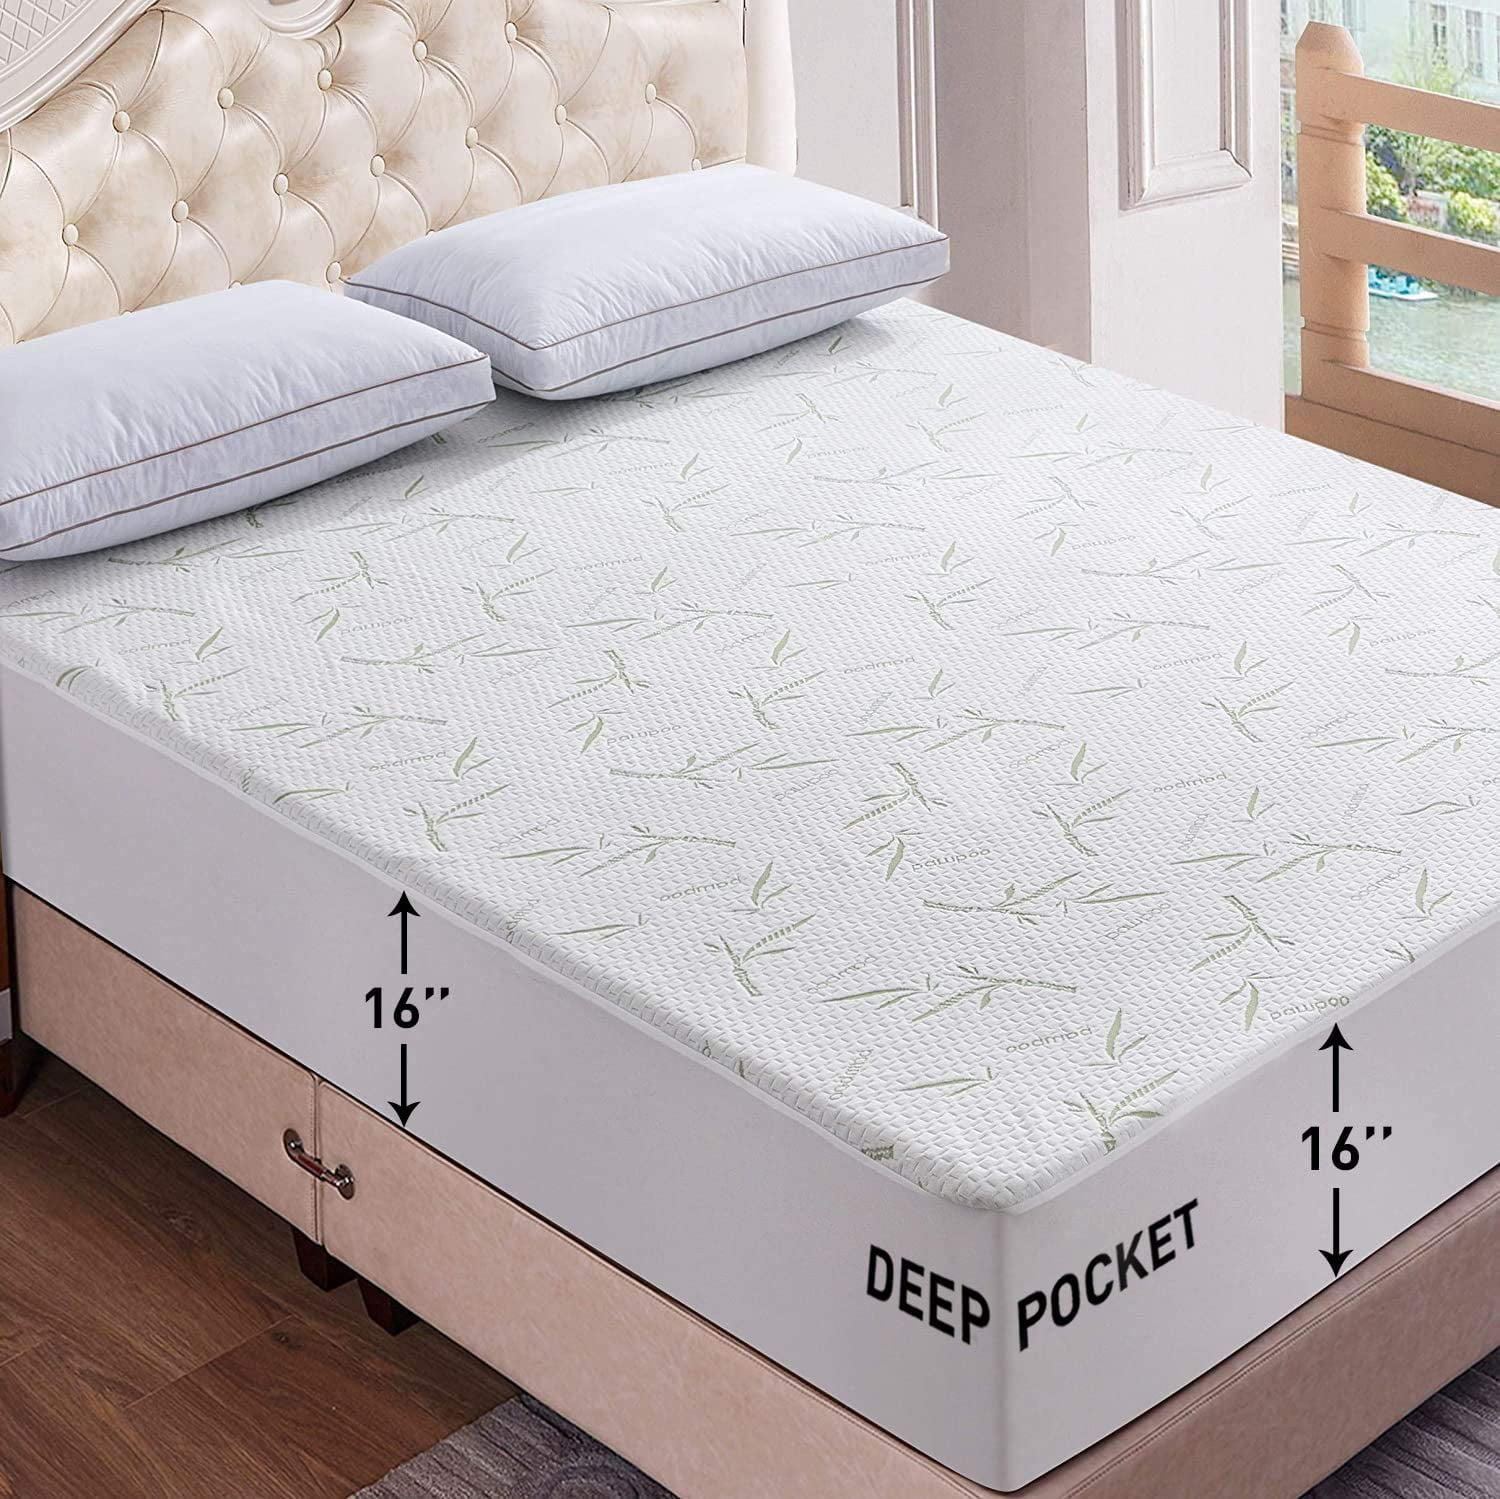 Bamboo Mattress Protector King Size, King Size Waterproof Bed Cover